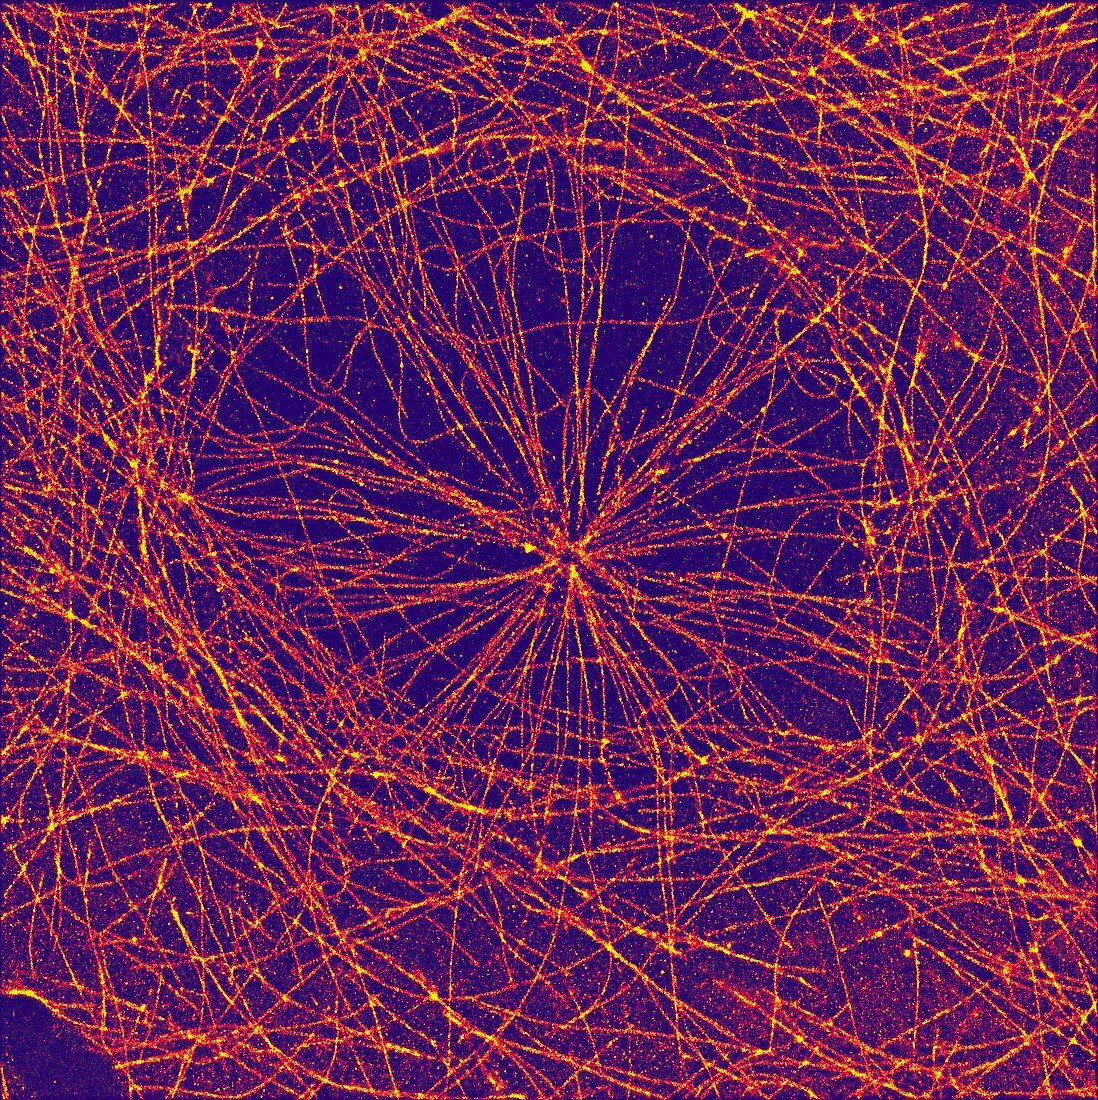 Microtubules,fluorescent micrograph